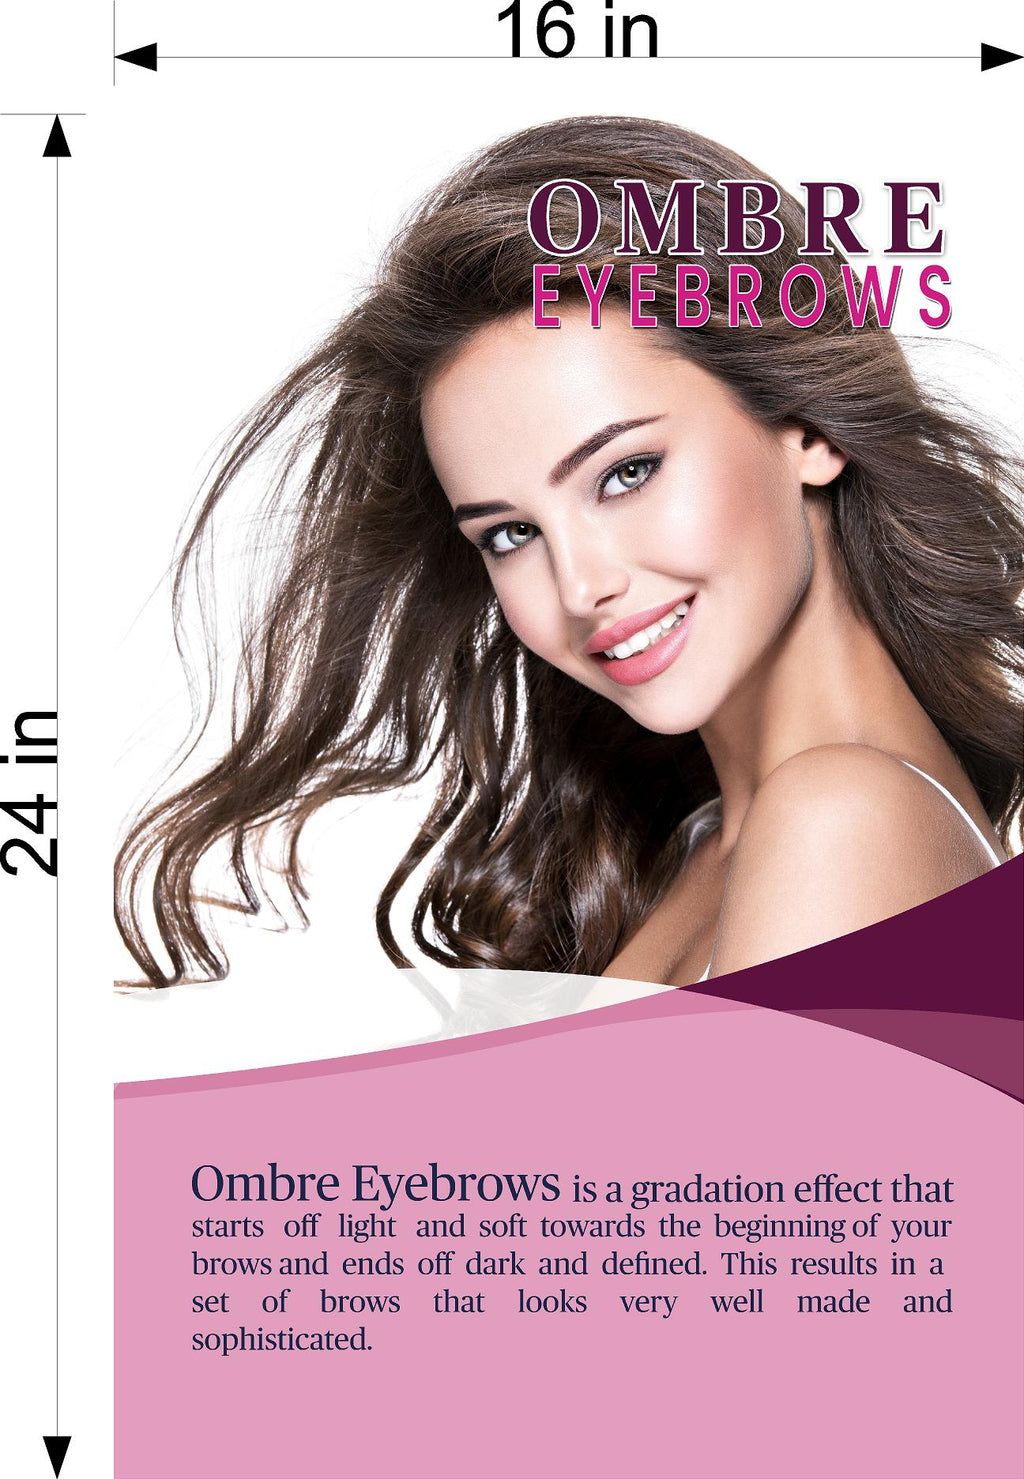 Ombre Eyebrows 08 Photo-Realistic Paper Poster Premium Interior Inside Sign Advertising Marketing Wall Window Non-Laminated Vertical